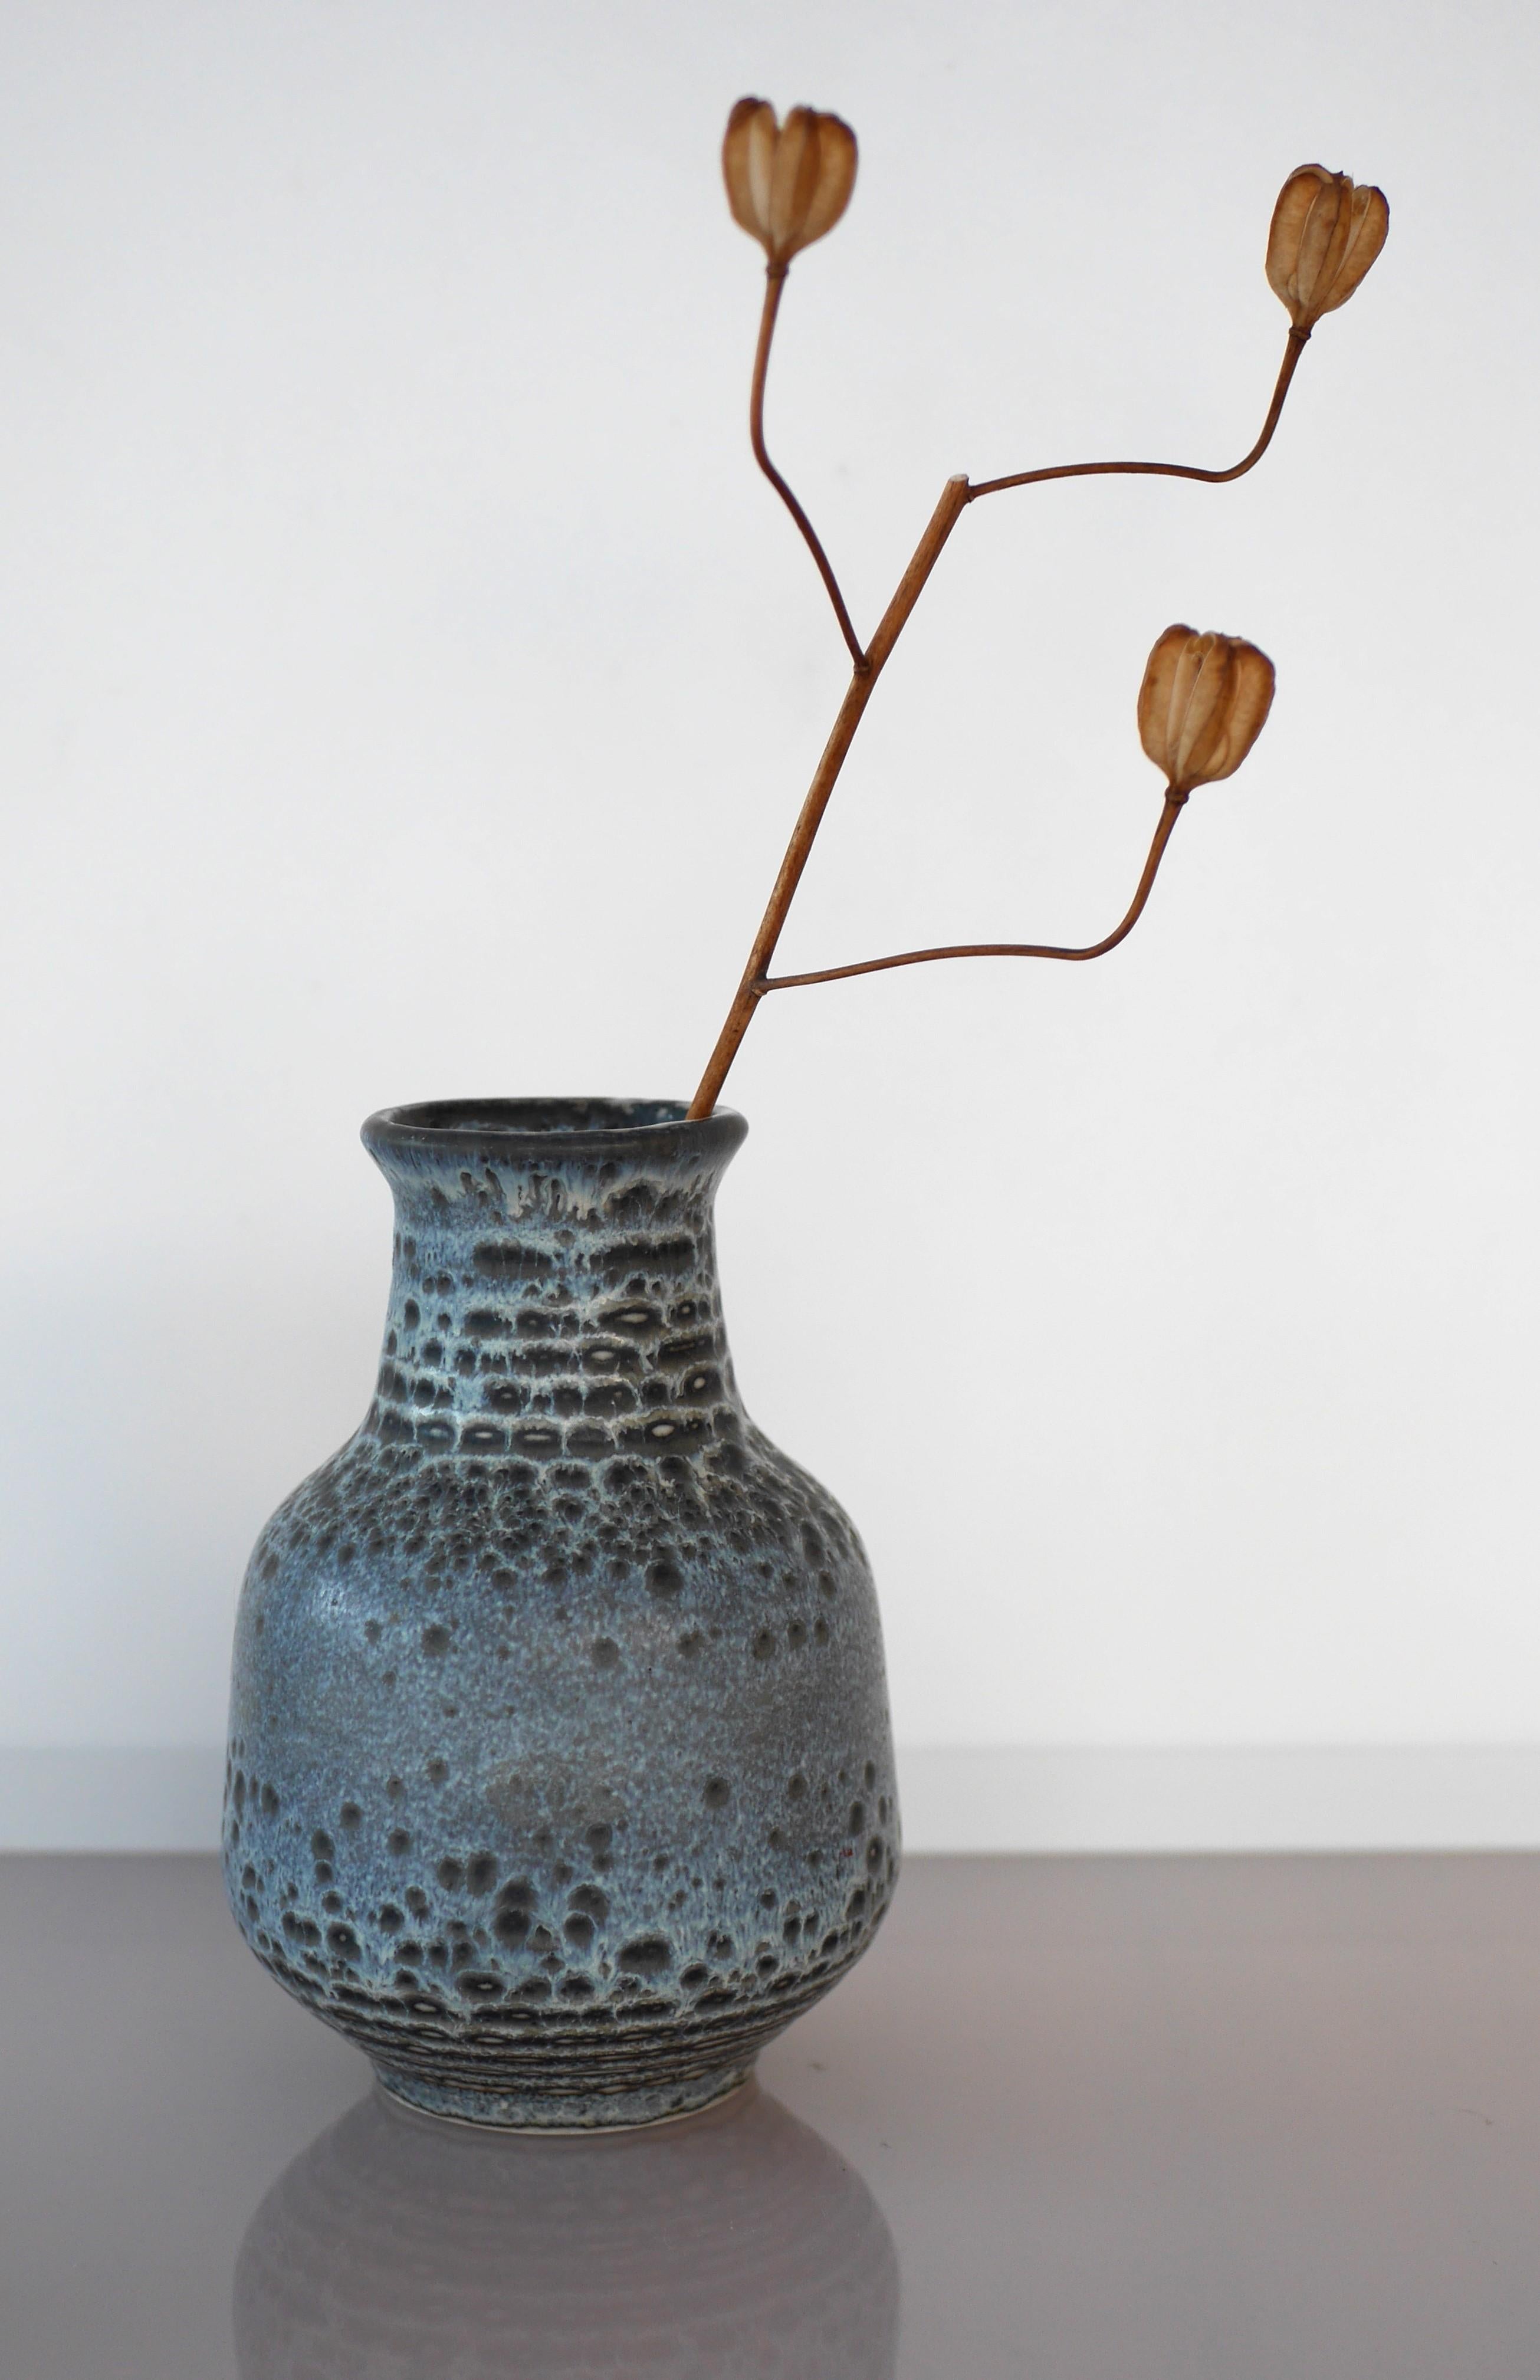 An extraordinary and rare hand-made vintage ceramic vase design by the very talented Gunnar Nylund for Rörstrand. What makes this vase so very special is that even though, it has a very simple design, it has the most elegant and sophisticated